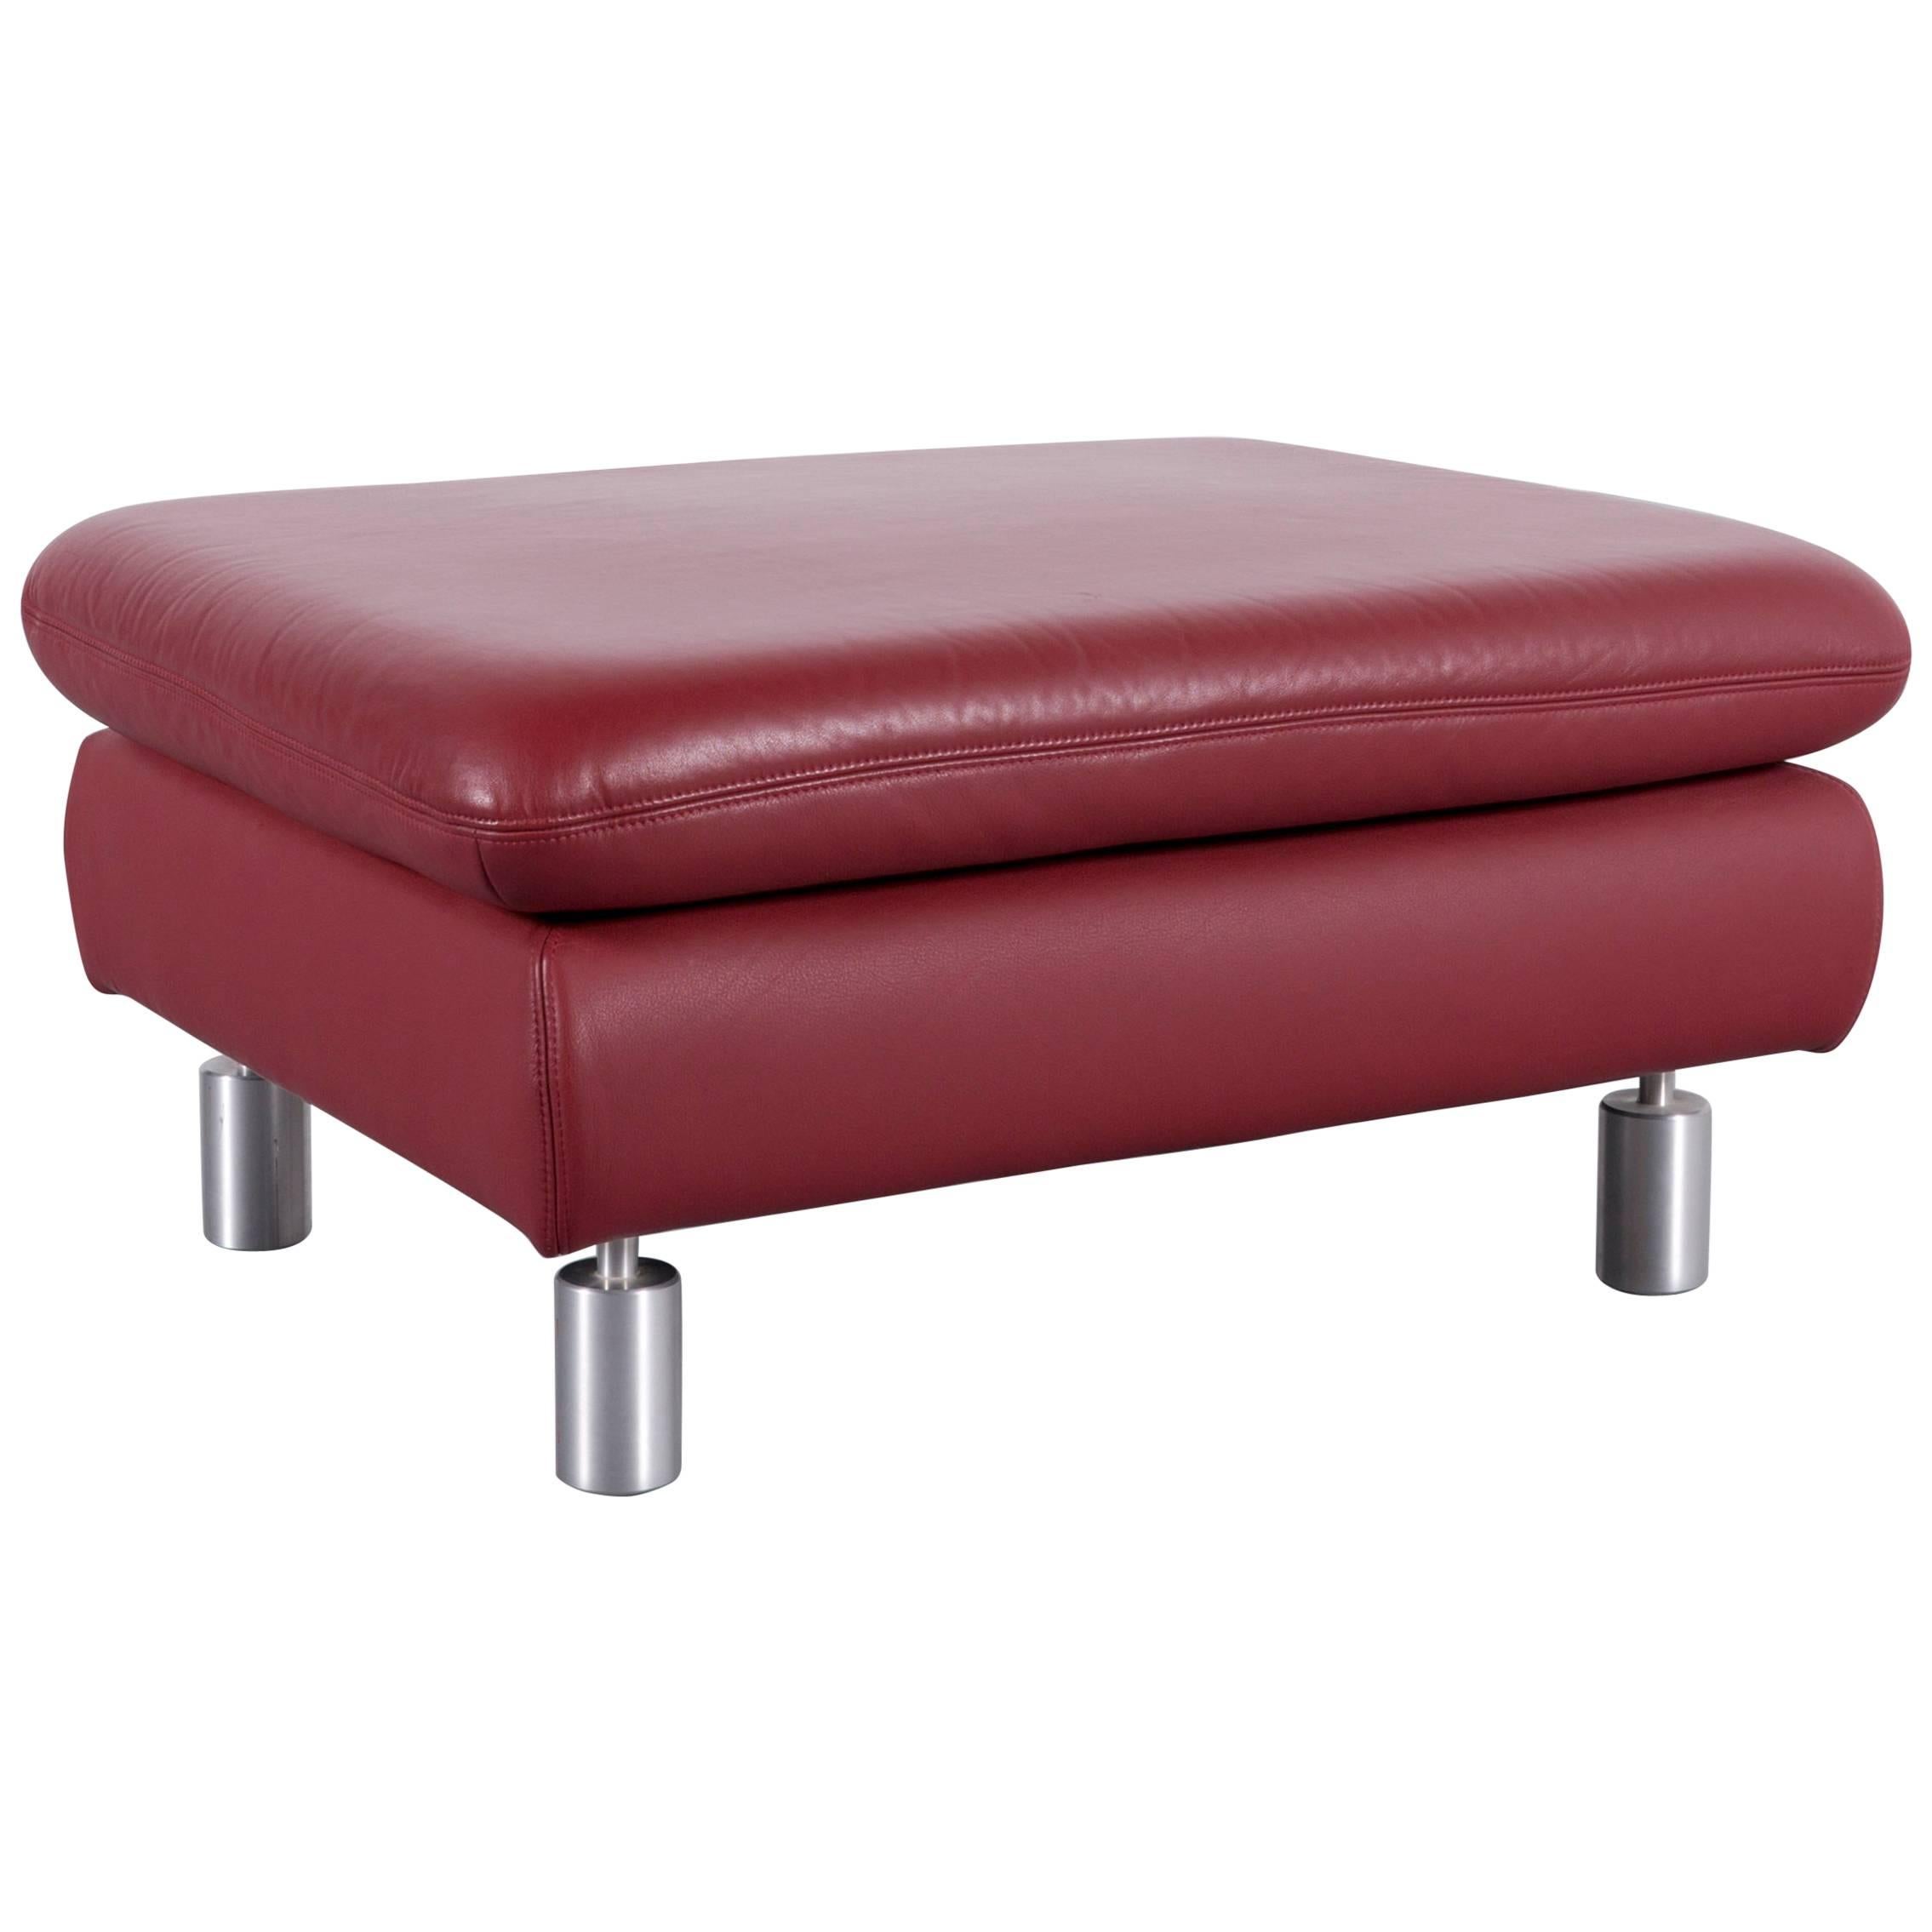 Koinor Rivoli Leather Foot-Stool Red Bench For Sale